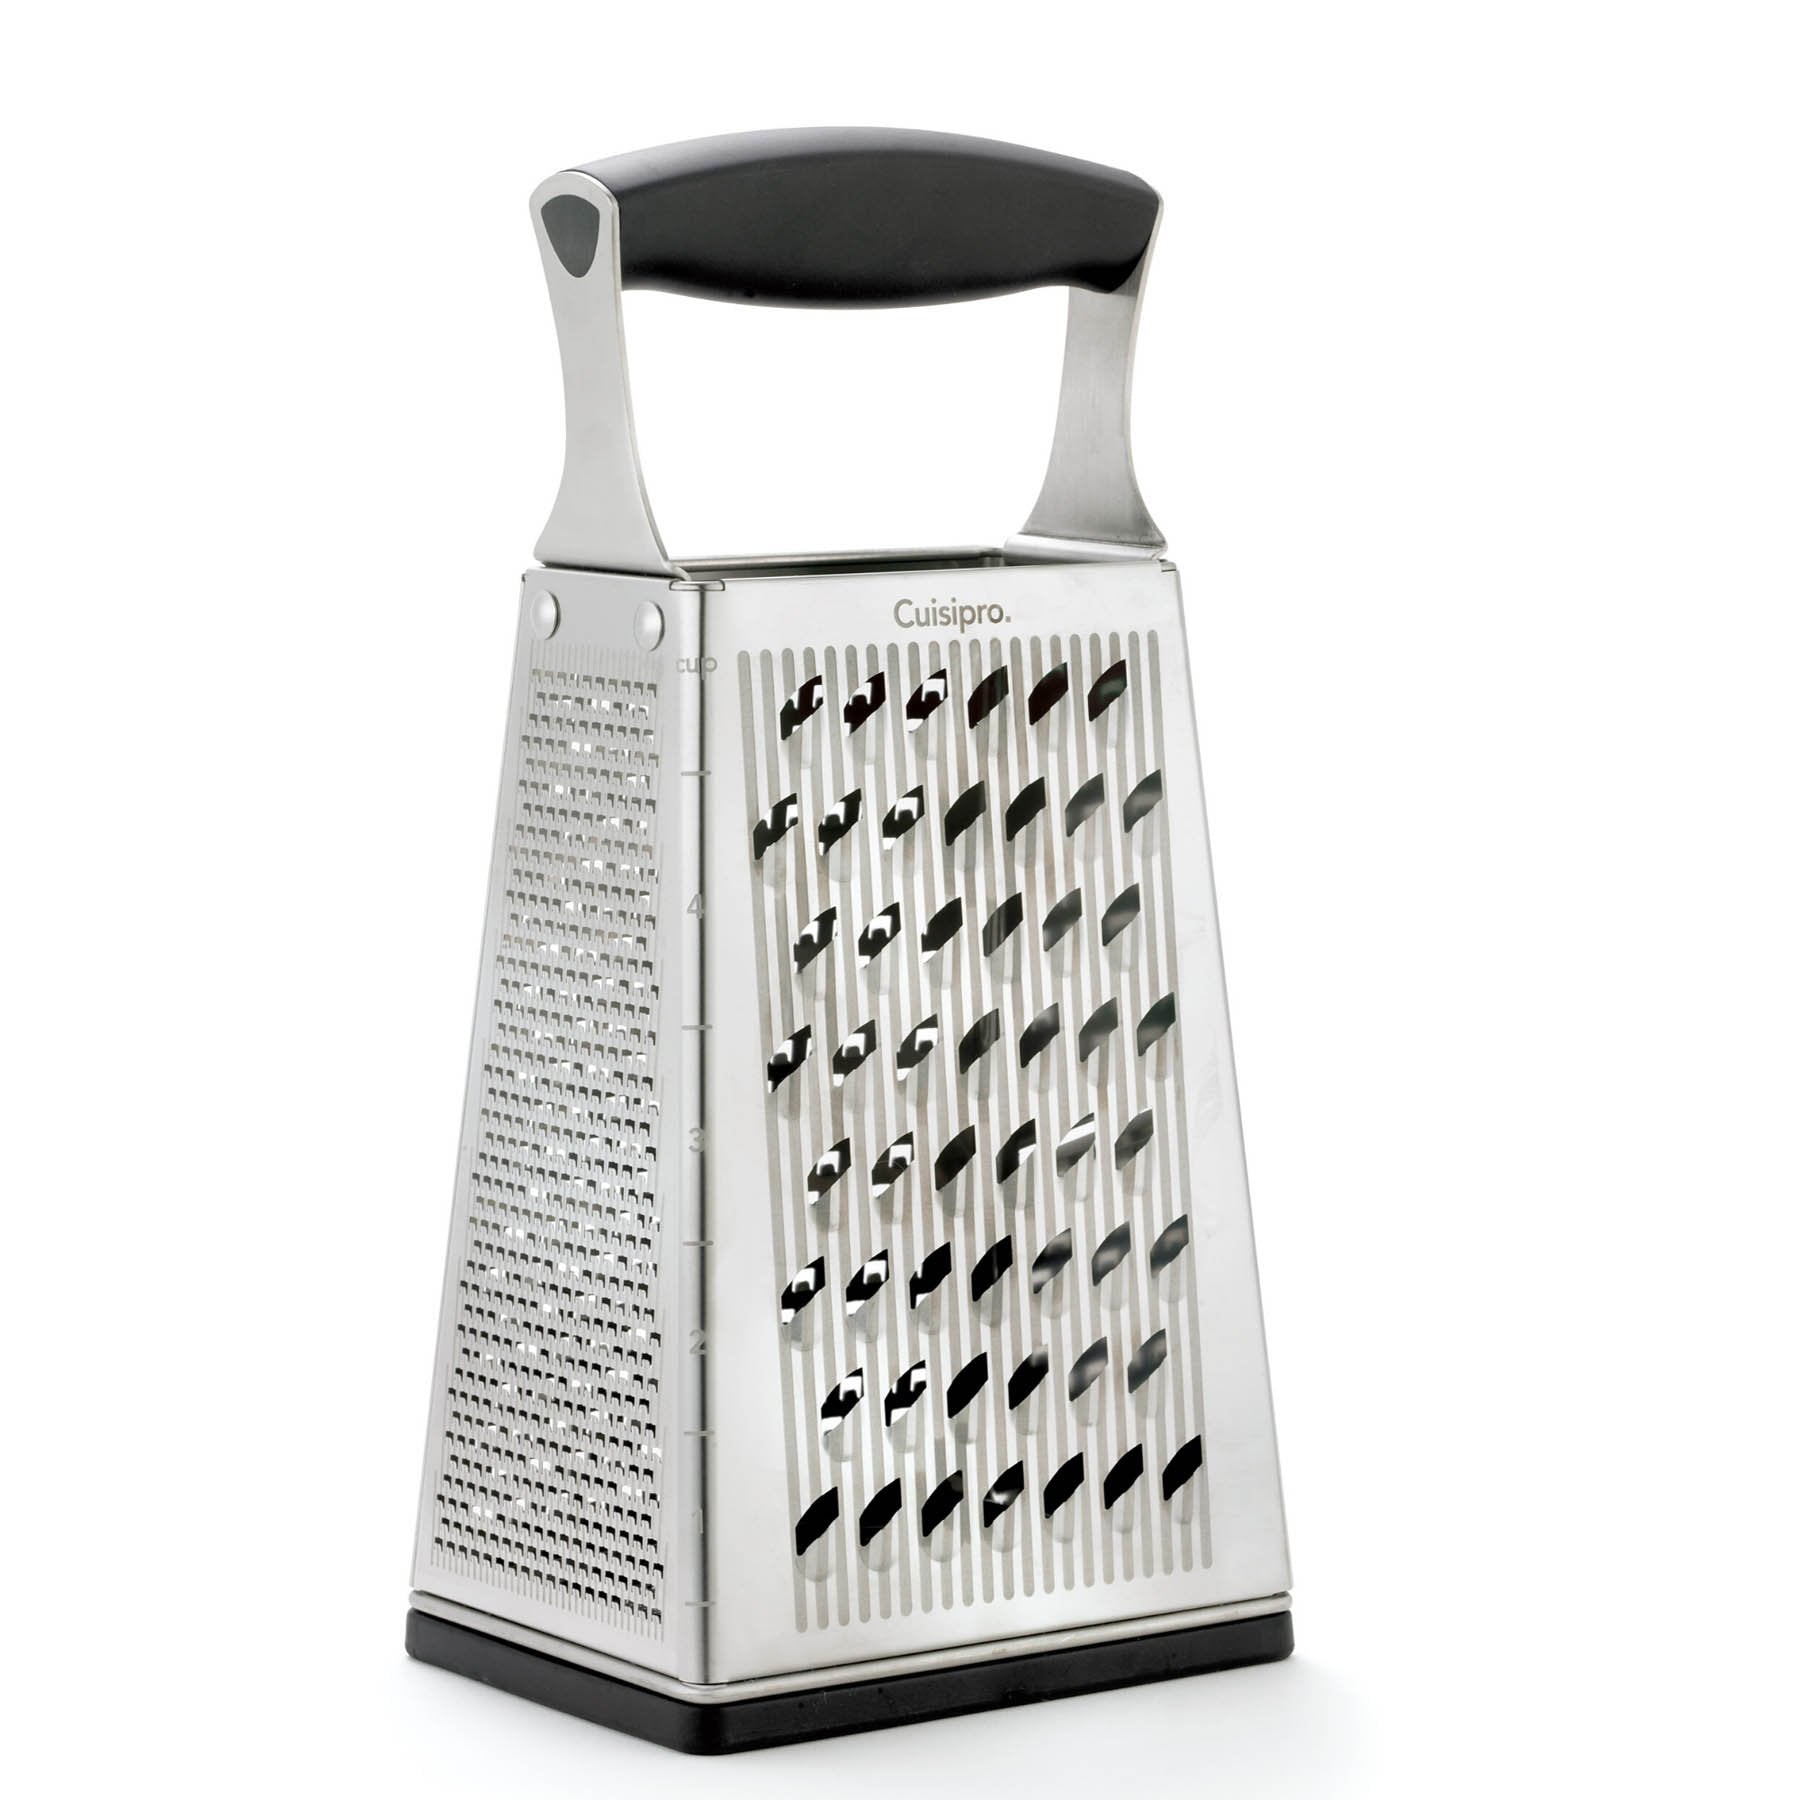 SEYNUR Stainless Steel Cheese Grater & Shredder 4 Sided Box Grater - Large  Grating Surface with Razor Sharp Blades - Perfect to Slice Grate Shred 